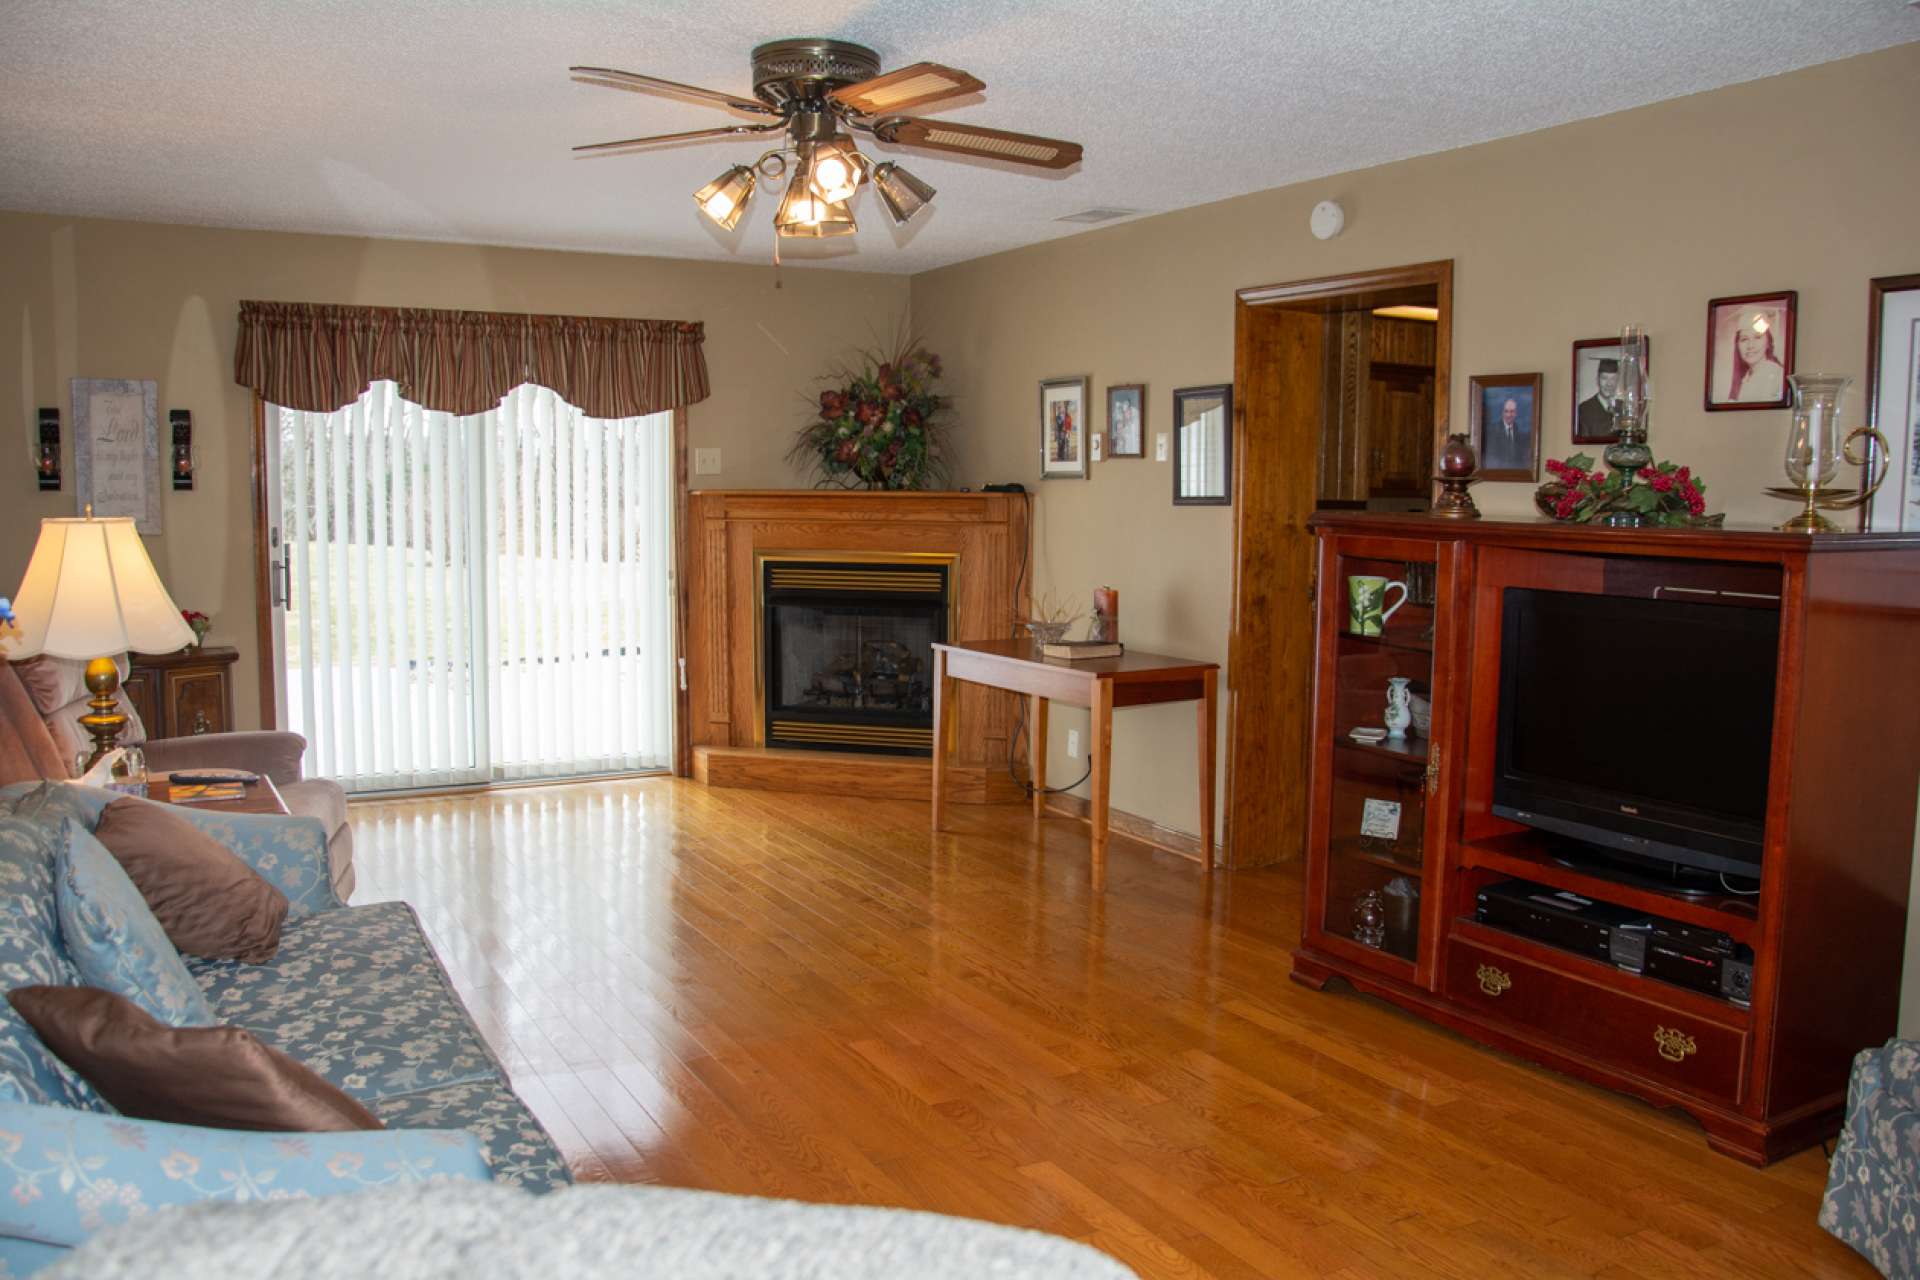 Enter family room with gleaming hardwood flooring, cozy corner fireplace and access to back deck.